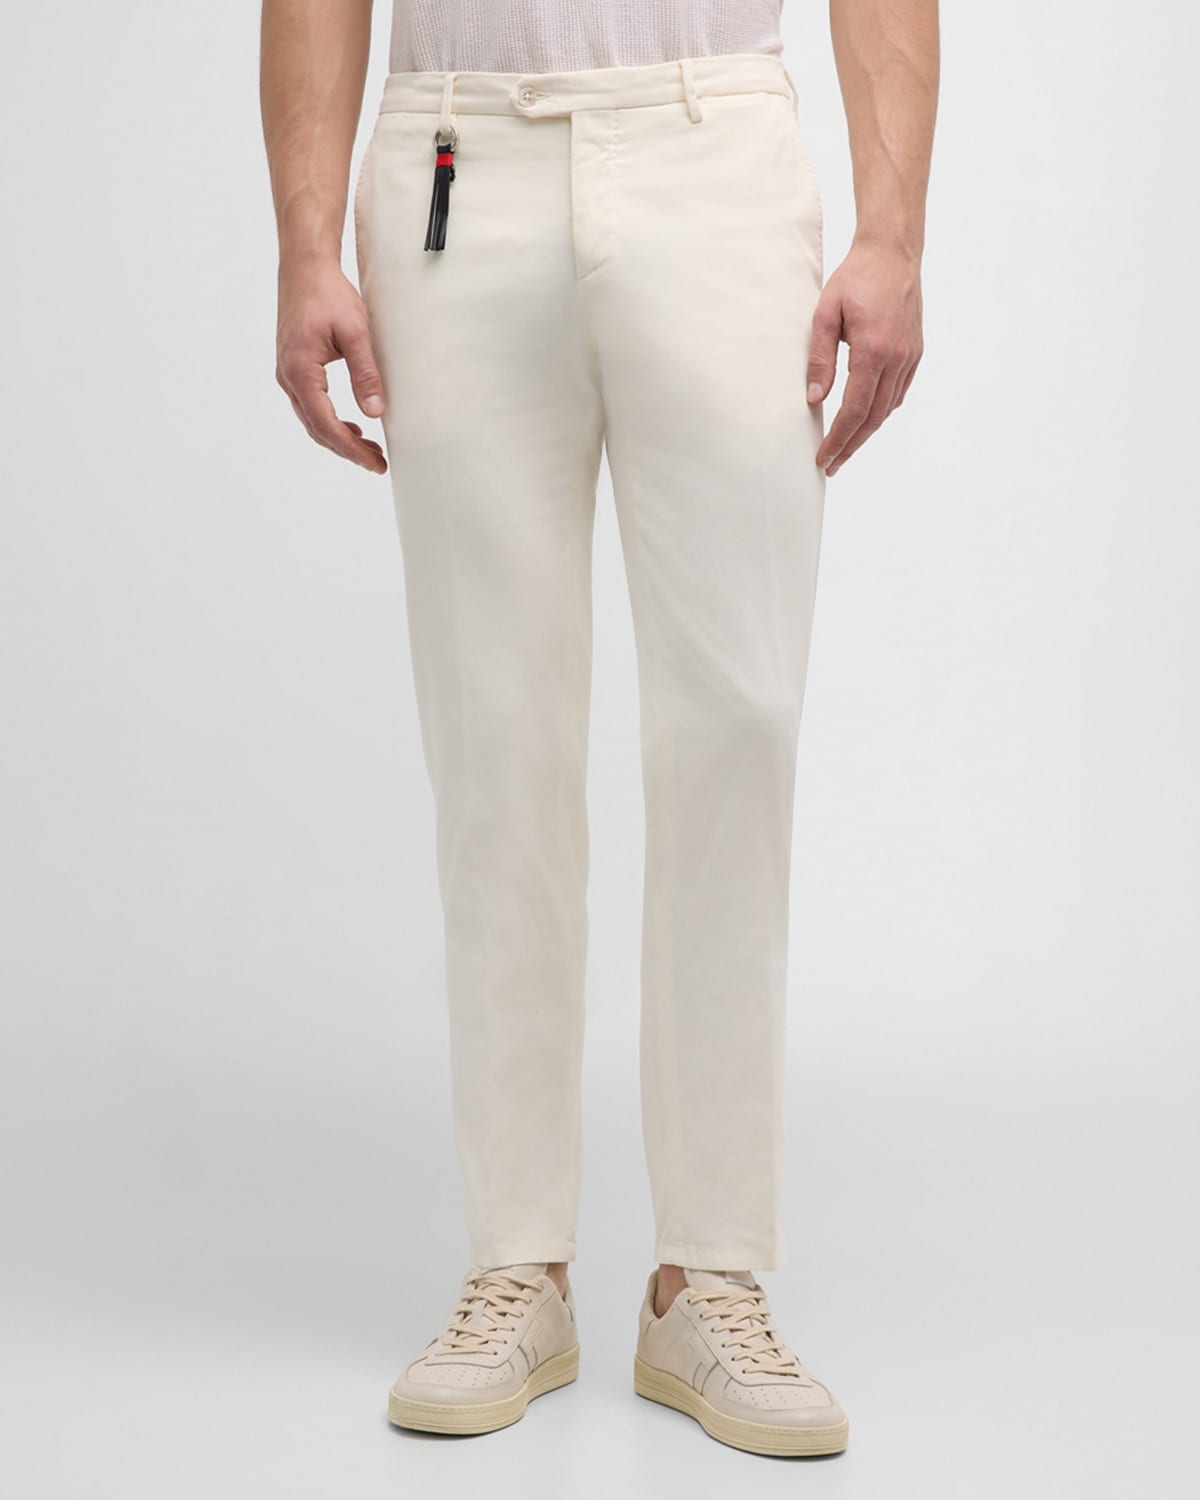 Men's Luxe Twill Chino Pants